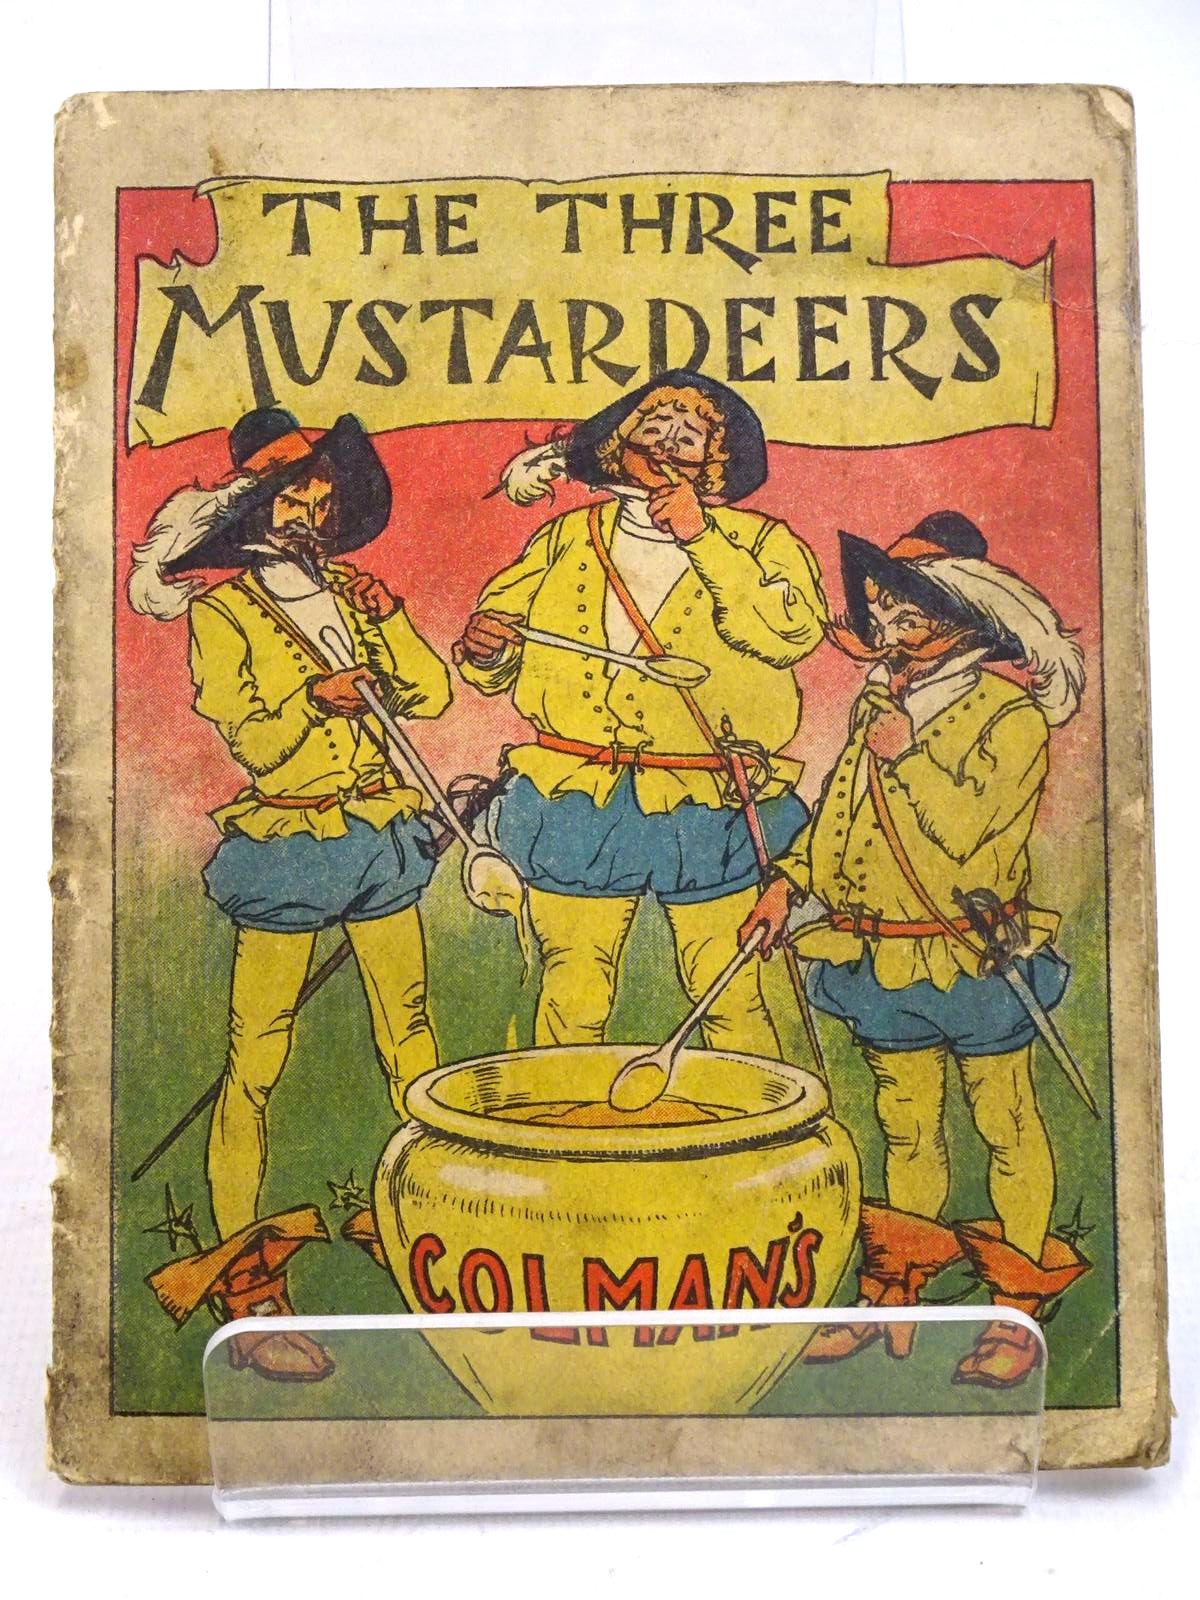 Photo of THE THREE MUSTARDEERS published by Colmans Foods (STOCK CODE: 1317958)  for sale by Stella & Rose's Books